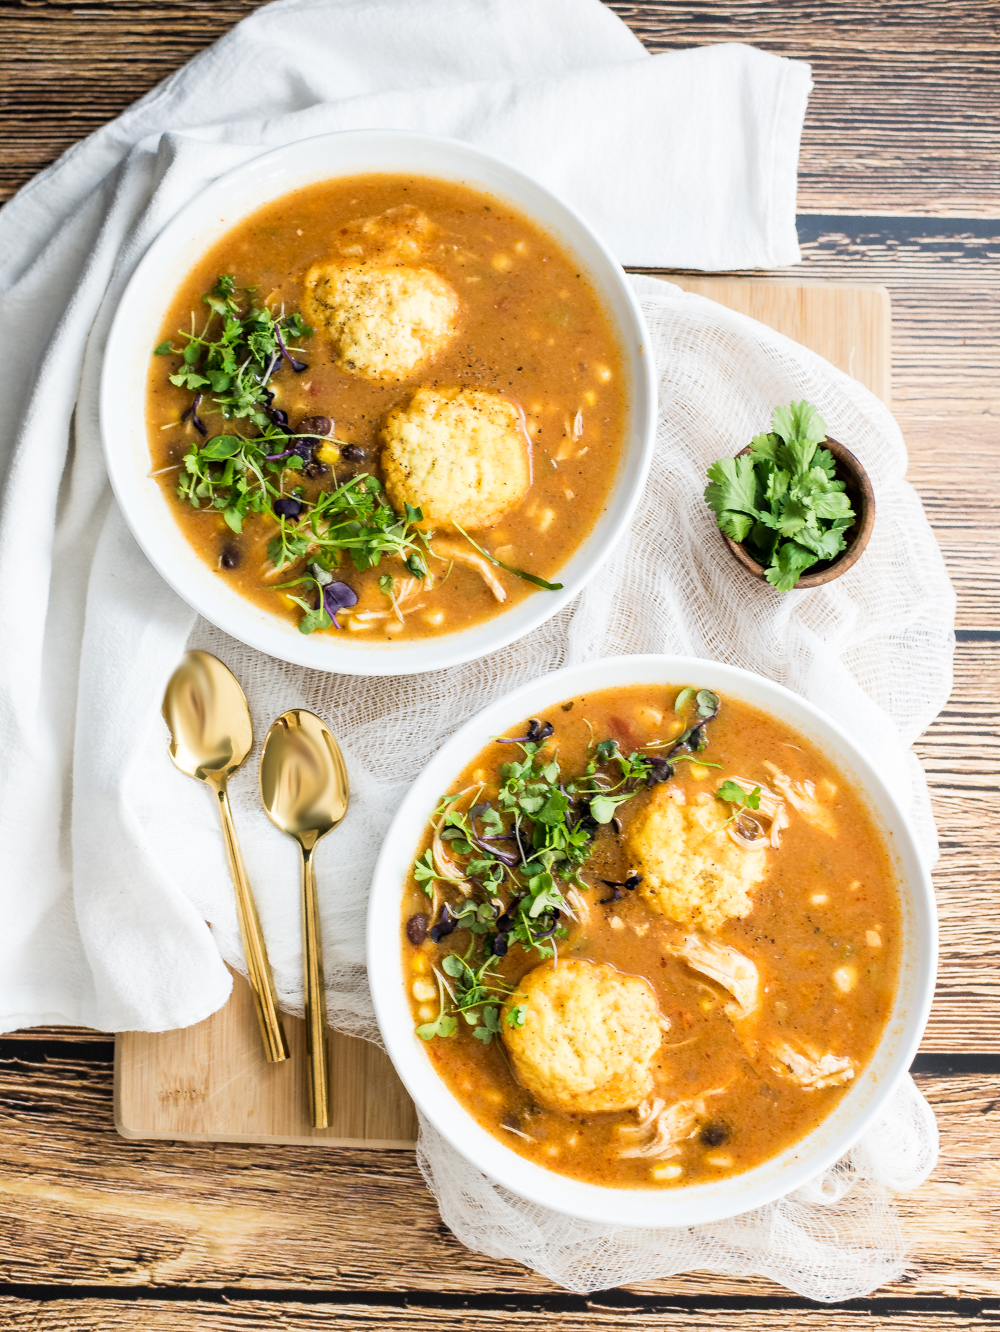 Southwestern chicken soup with cornmeal dumplings is a fun take on traditional chicken soup and dumpling with a spicy twist!